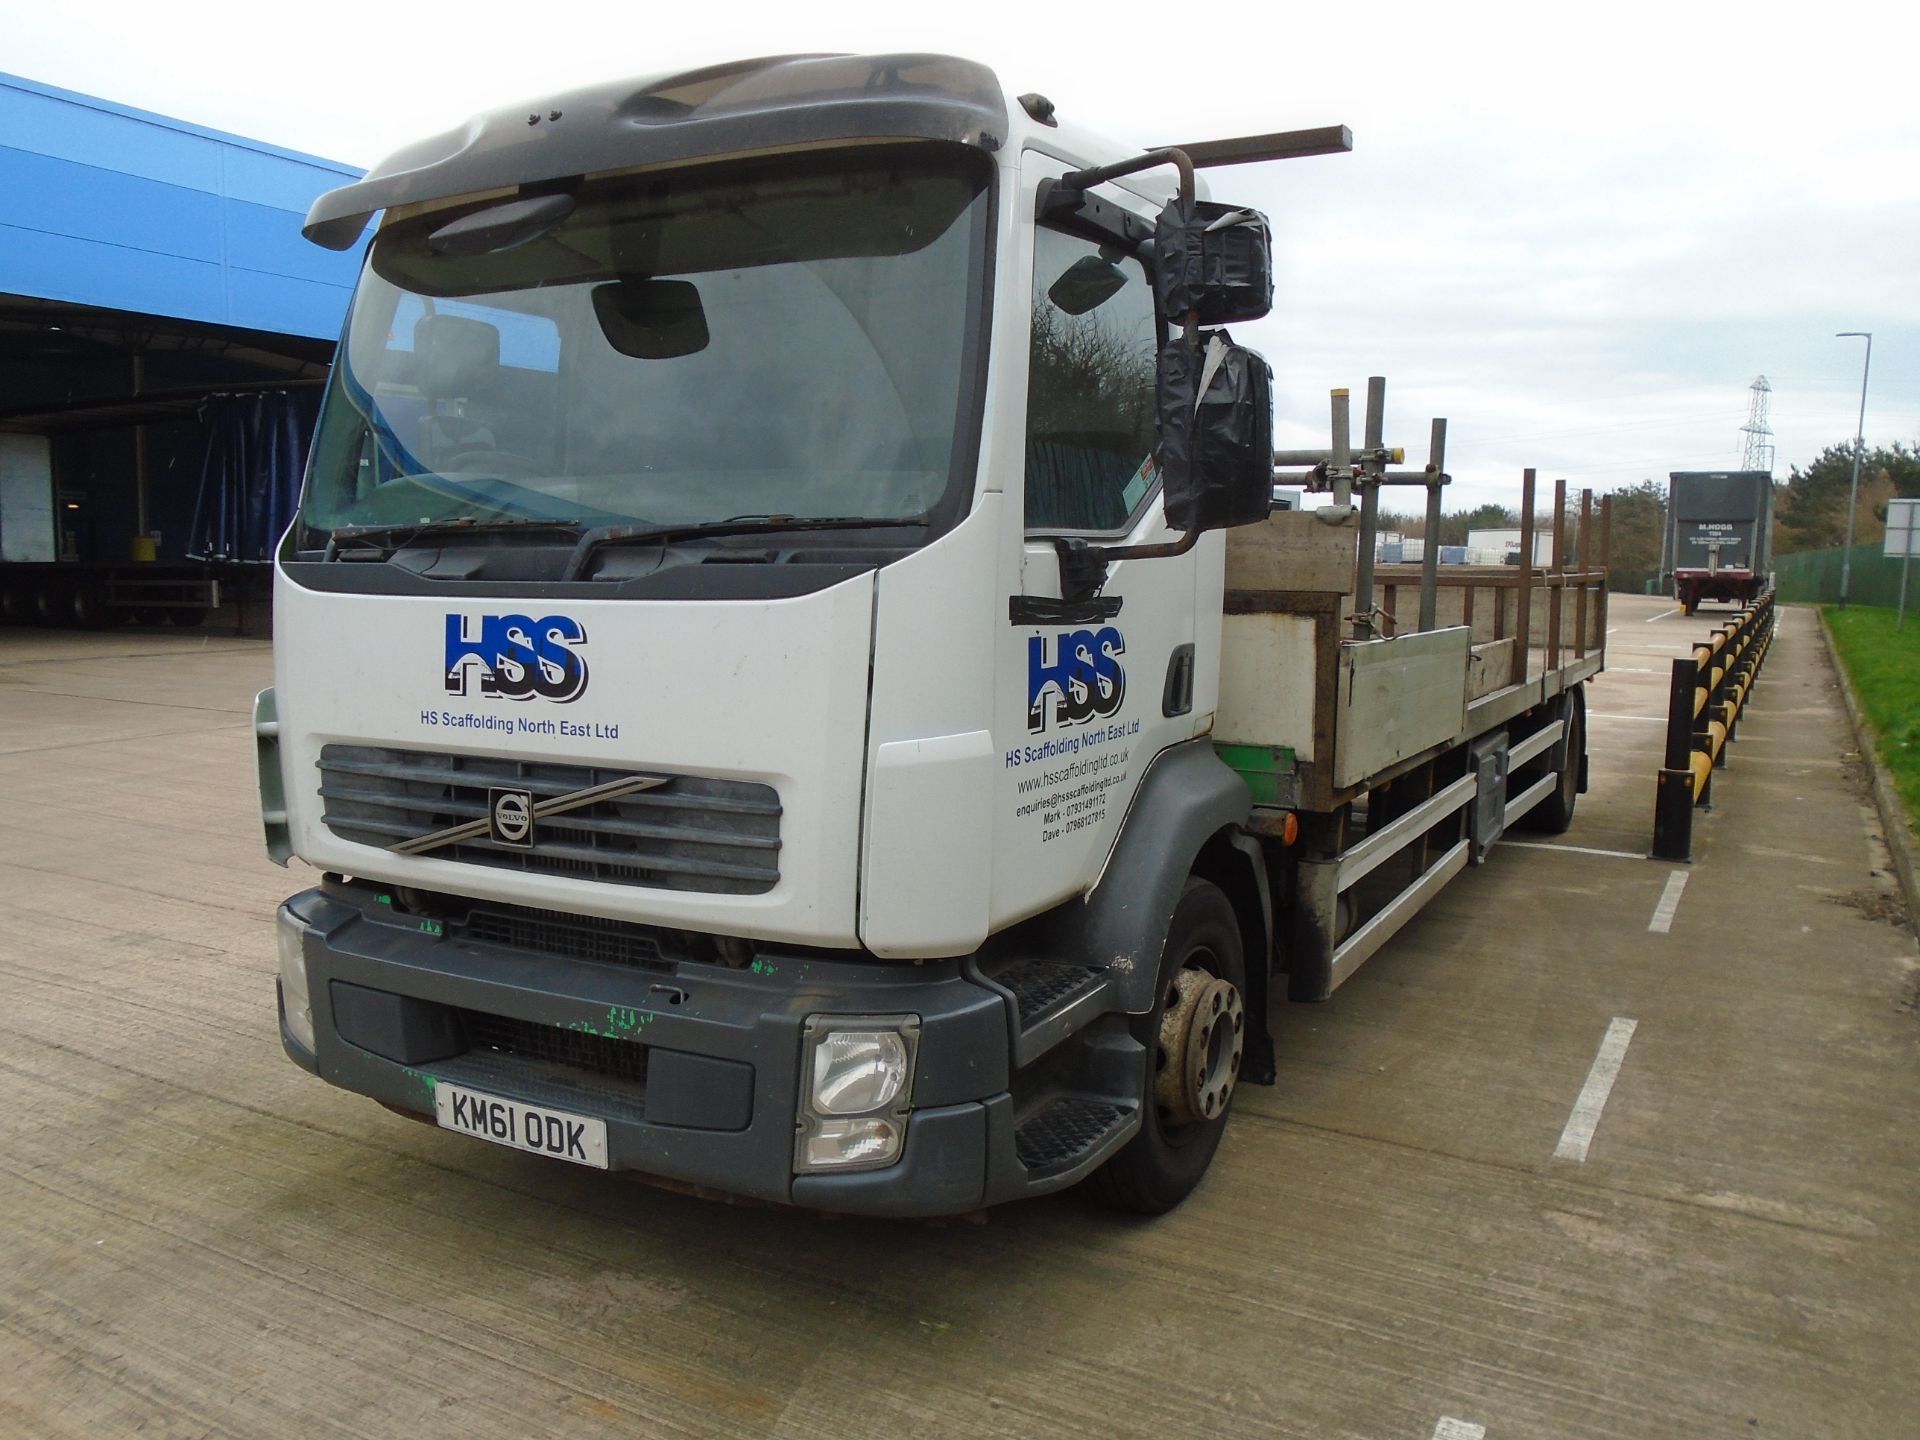 Volvo FL-240 15-Ton Flatbed Wagon – KM61 ODK – First Registered January 2012 – Mileage Unknown – - Image 2 of 11